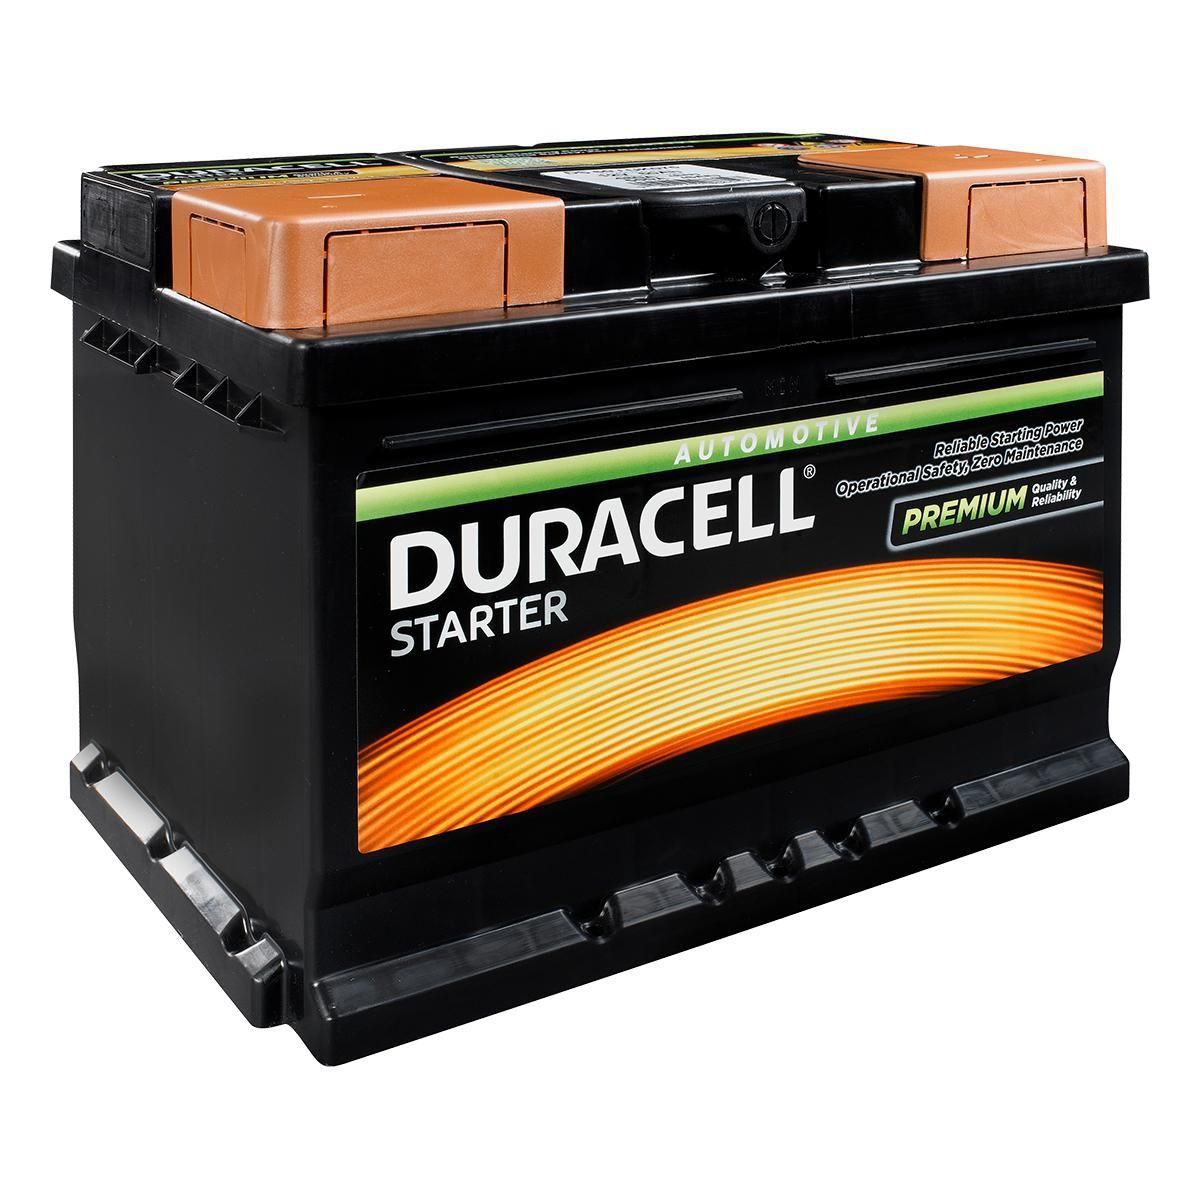 duracell-battery-catalina-at-harris-teeter-coupons-and-rebates-the